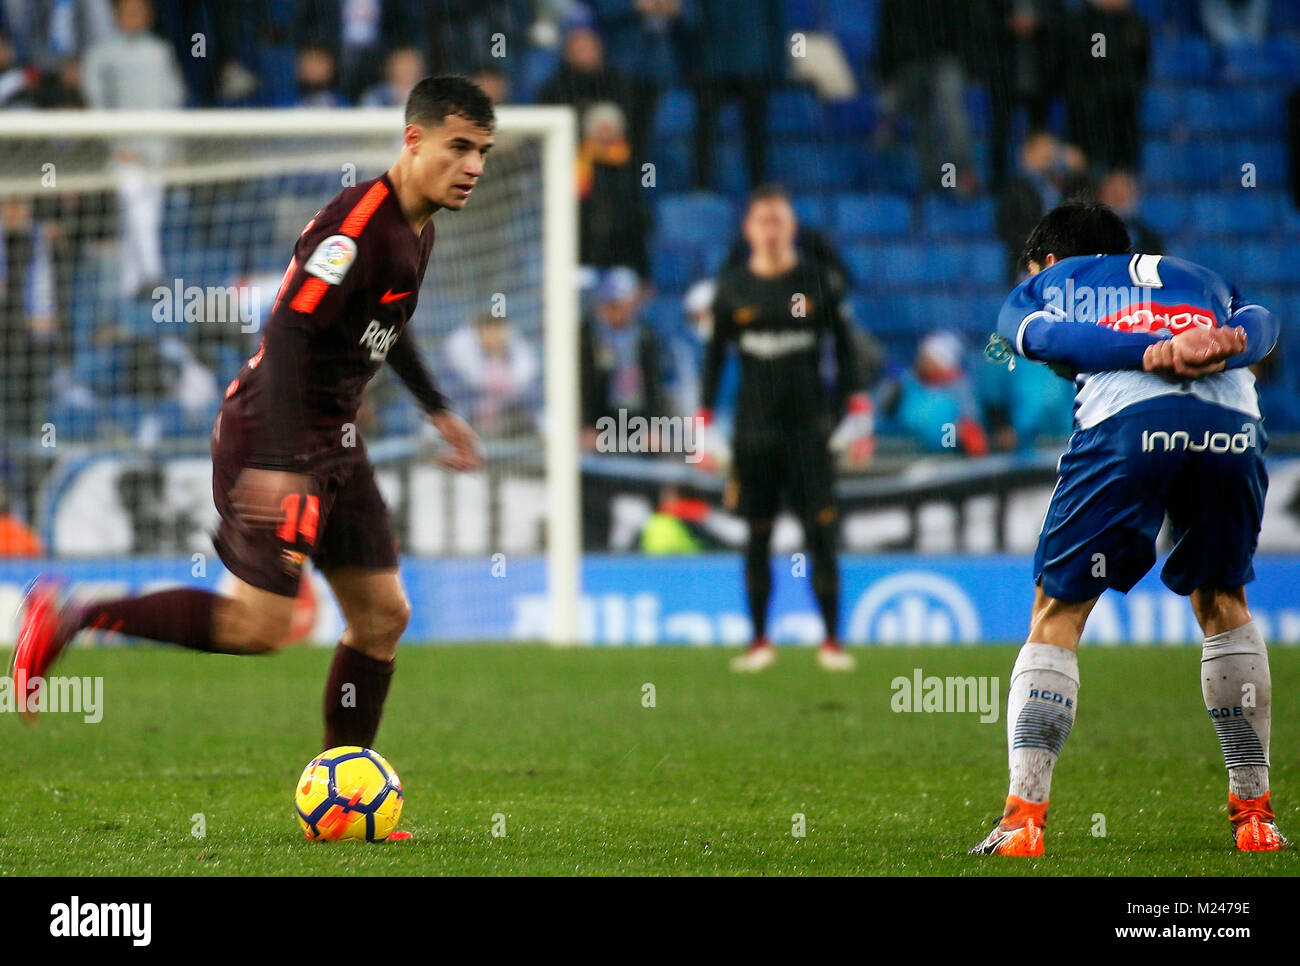 Barcelona, Spain. 01st Feb, 2018. Philippe Coutinho during the match between RCD Espanyol vs FC Barcelona, for the round 22 of the Liga Santander, played at Cornella -El Prat Stadium on 3th February 2018 in Barcelona, Spain. Credit: Gtres Información más Comuniación on line, S.L./Alamy Live News Stock Photo